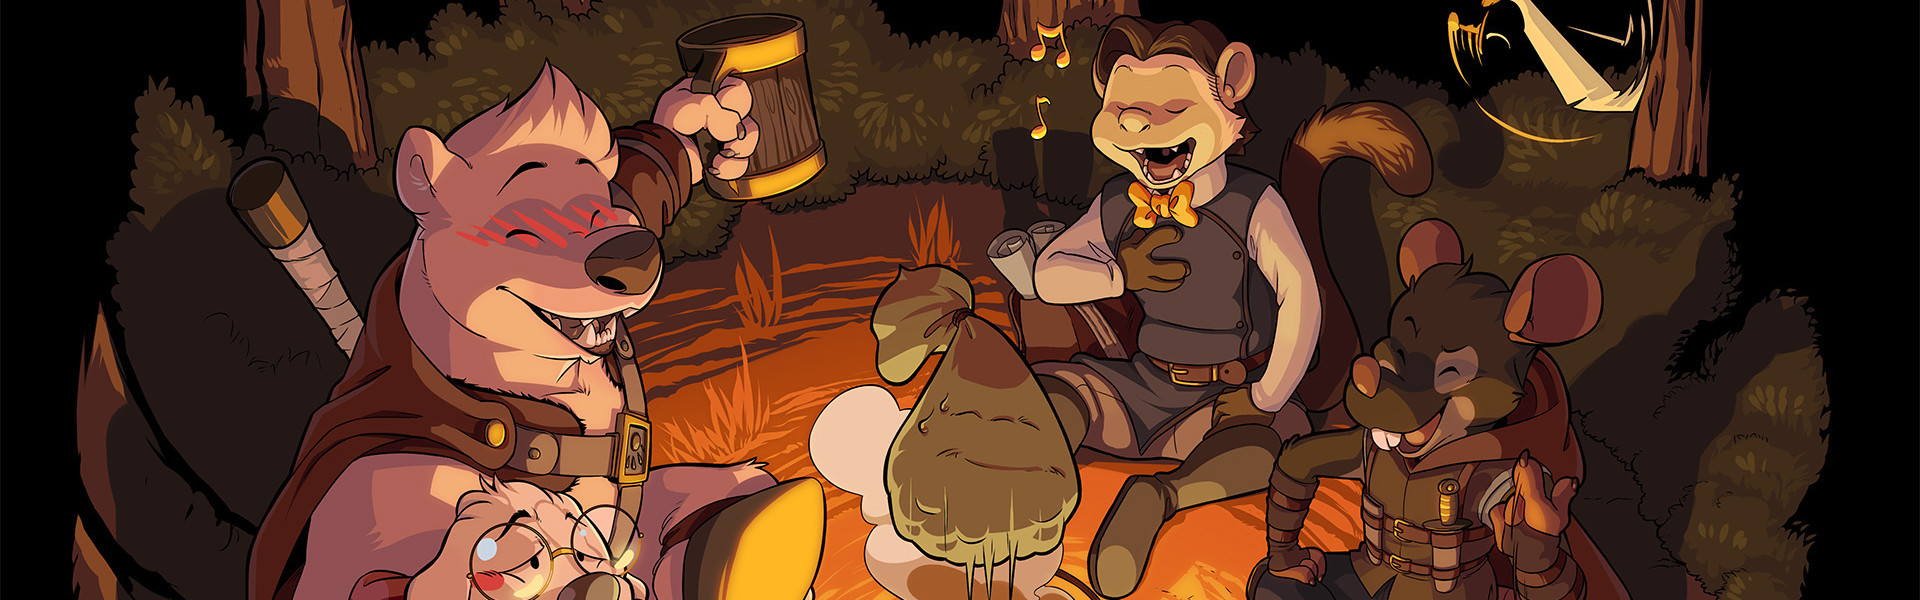 Our adventurers, Arden, Bata, Sam, and Zaus, enjoying some peace and quiet by a campfire.